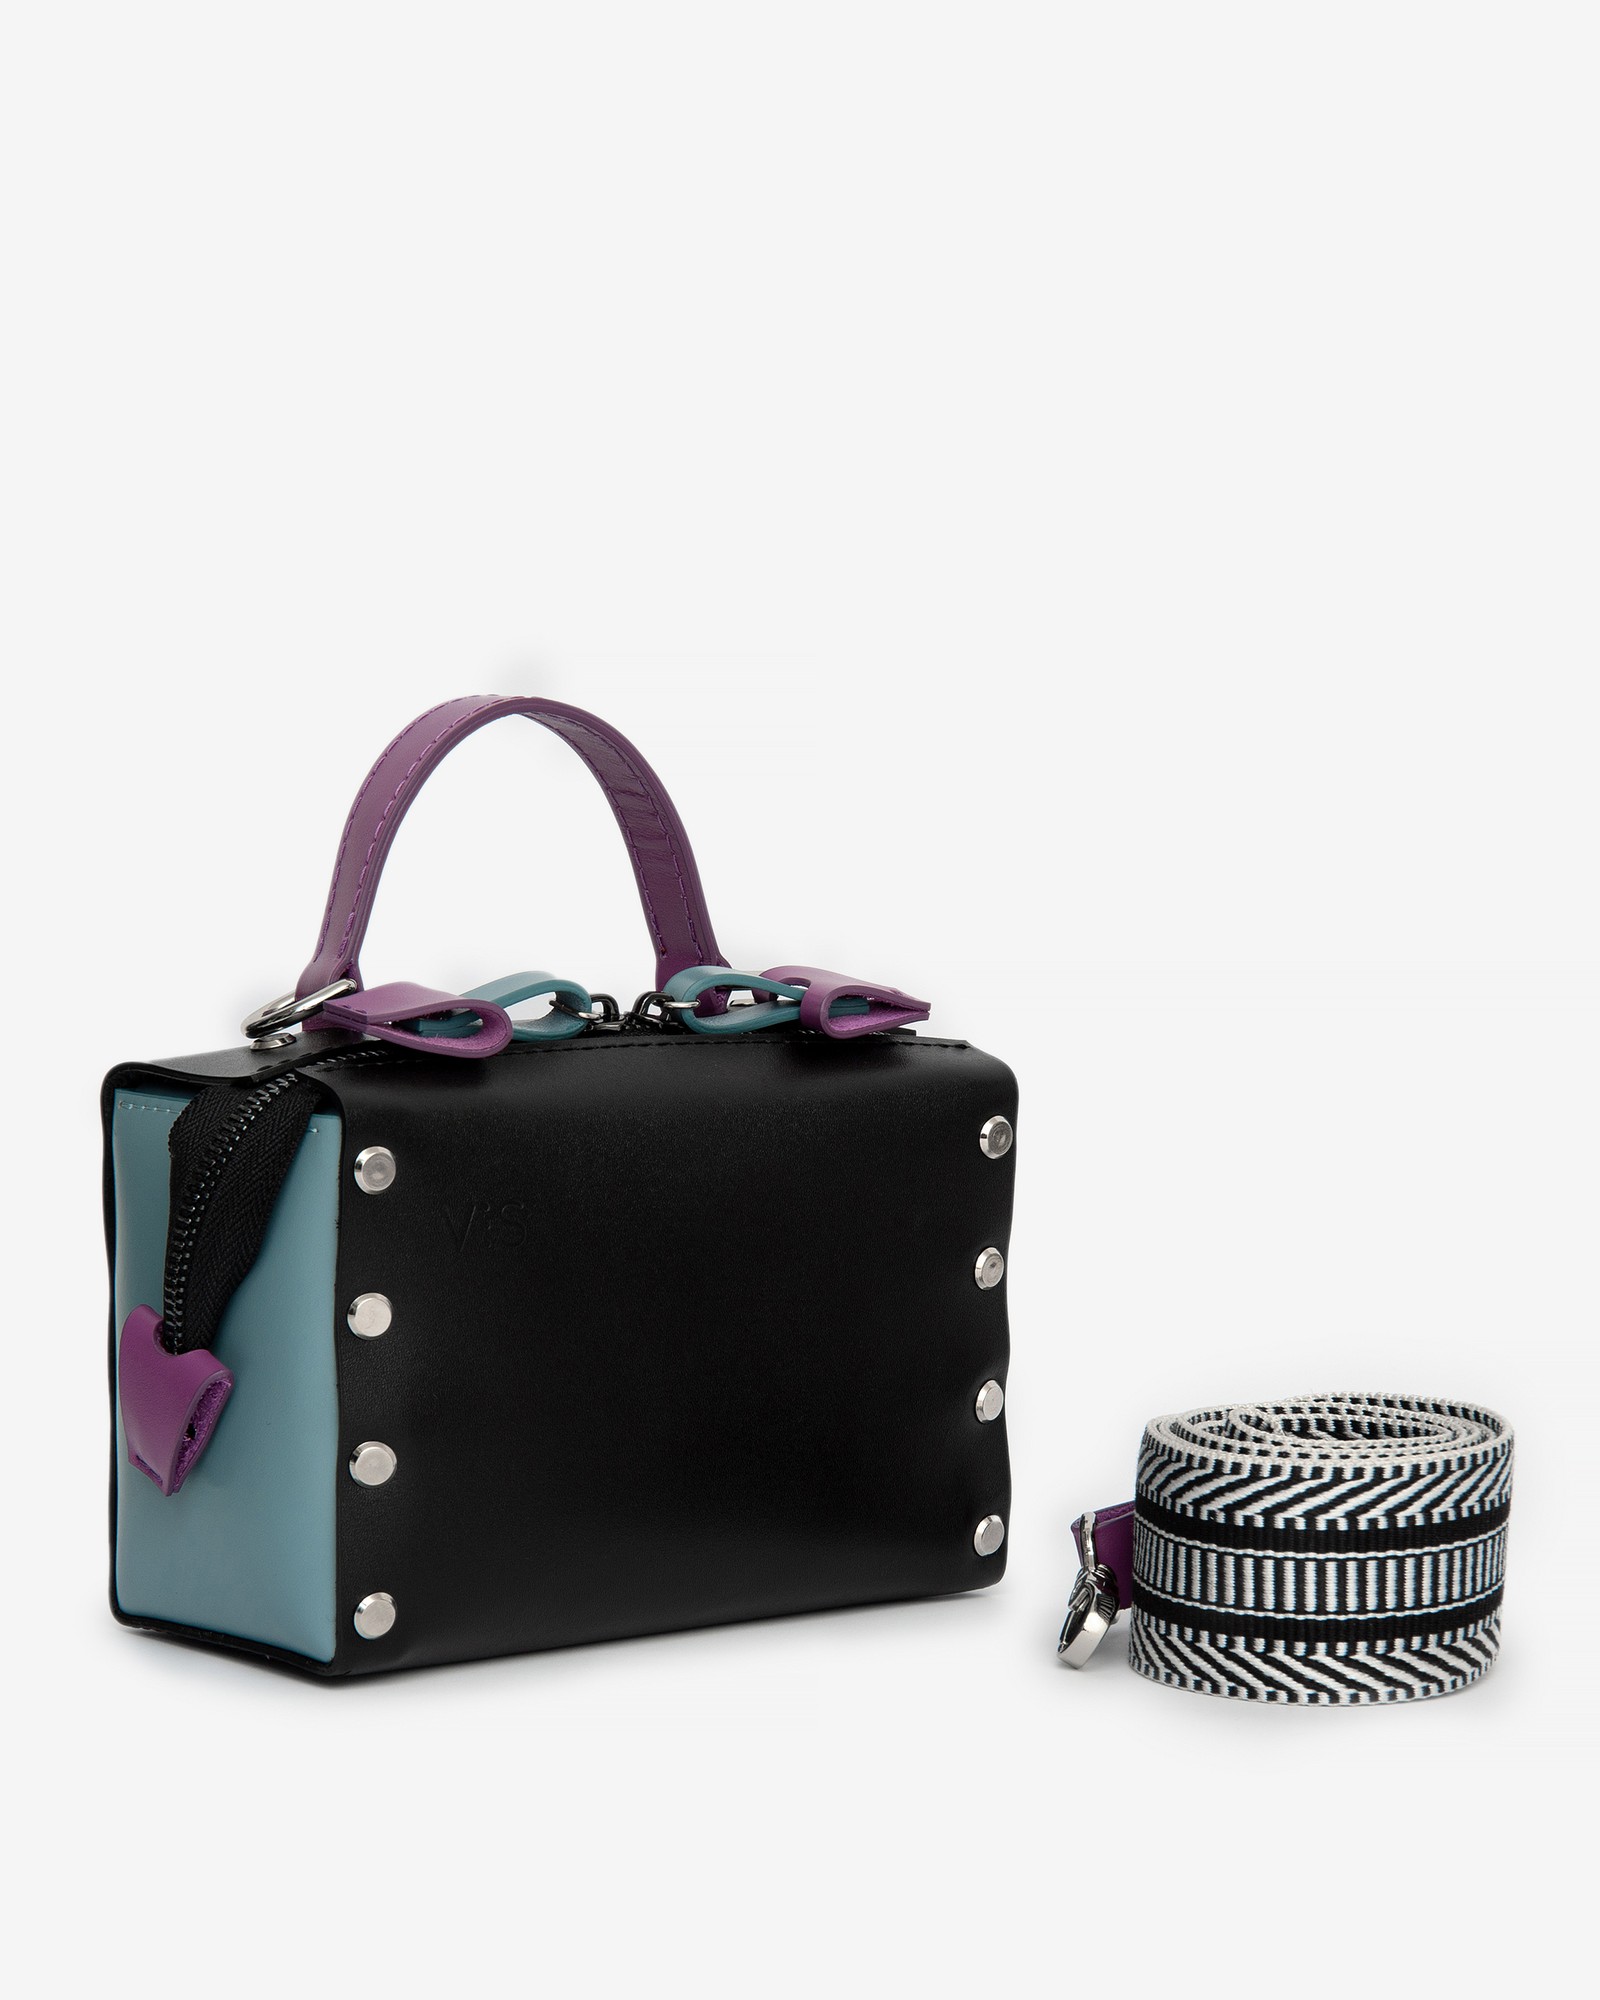 Antares leather bag in black, blue and purple color